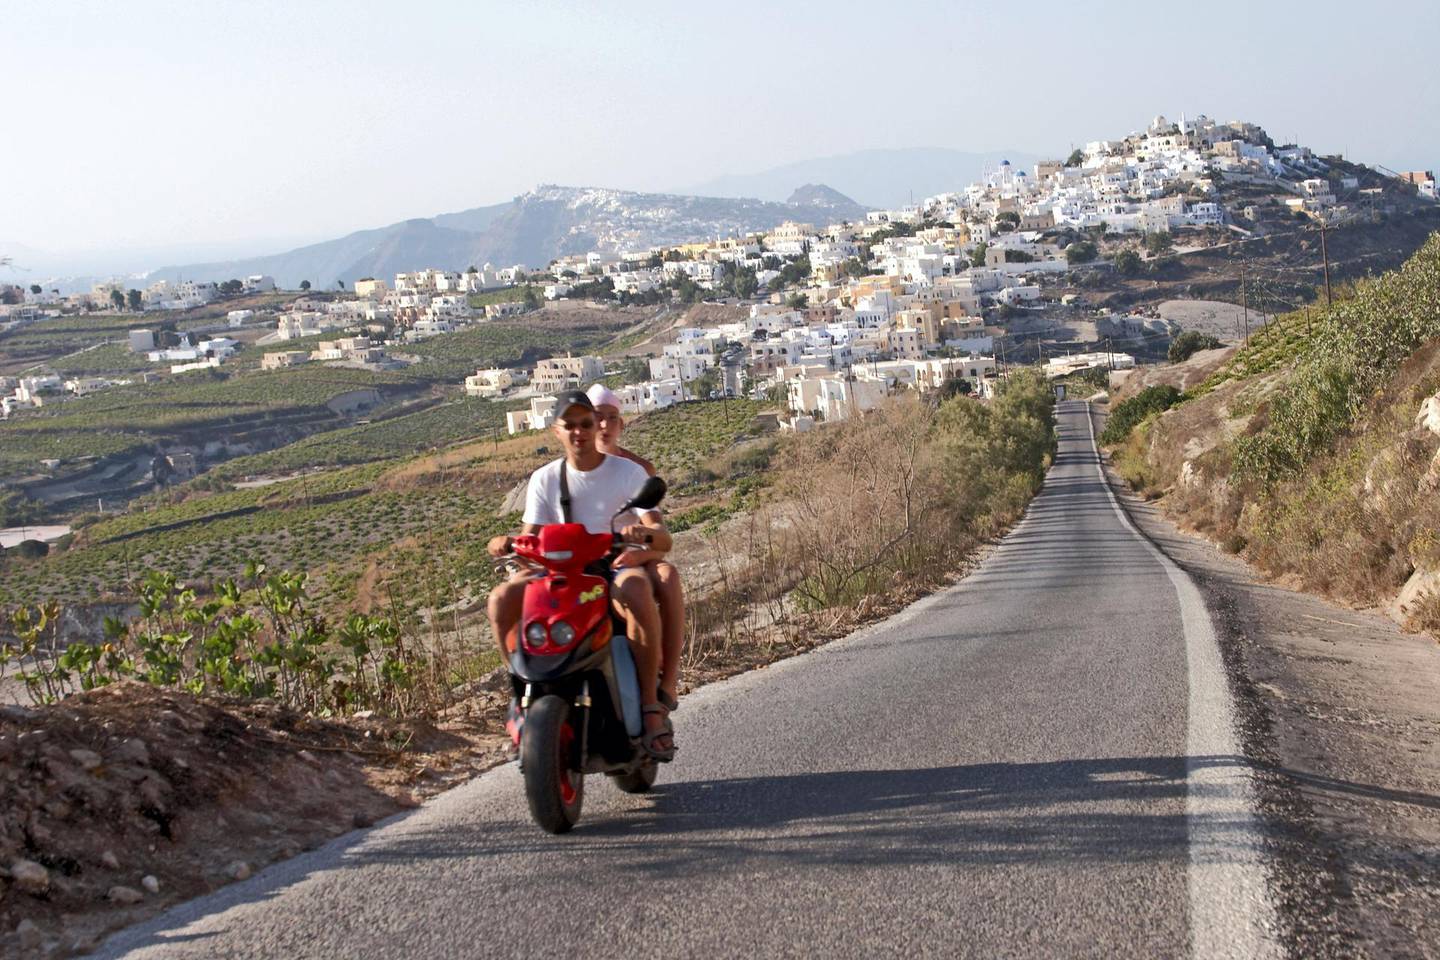 A6GMR0 View of Pyrgos or Pirgos with people on scooter motorbike or cycle Greek Island of Santorini or Thira Greece